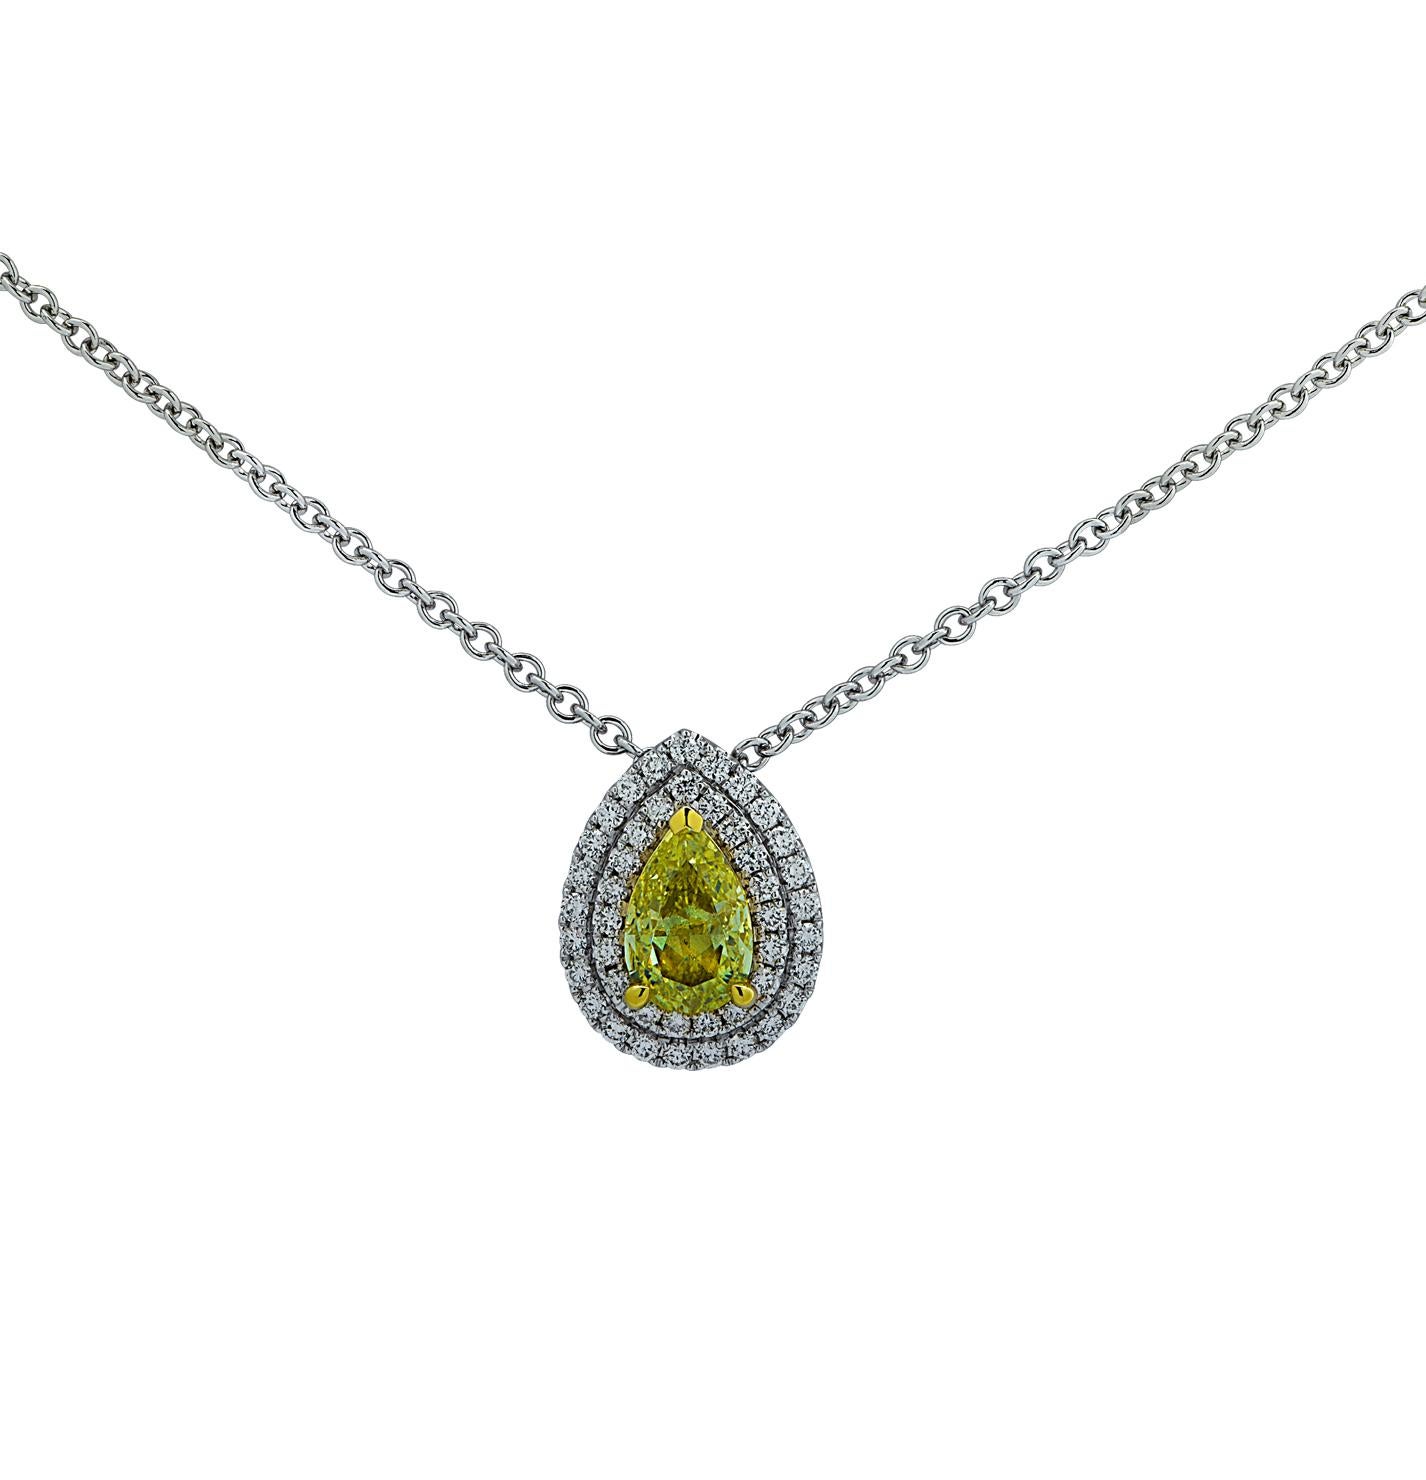 Vivid Diamonds GIA Certified 1.01 Carat Fancy Yellow Diamond Pendant Necklace In New Condition For Sale In Miami, FL